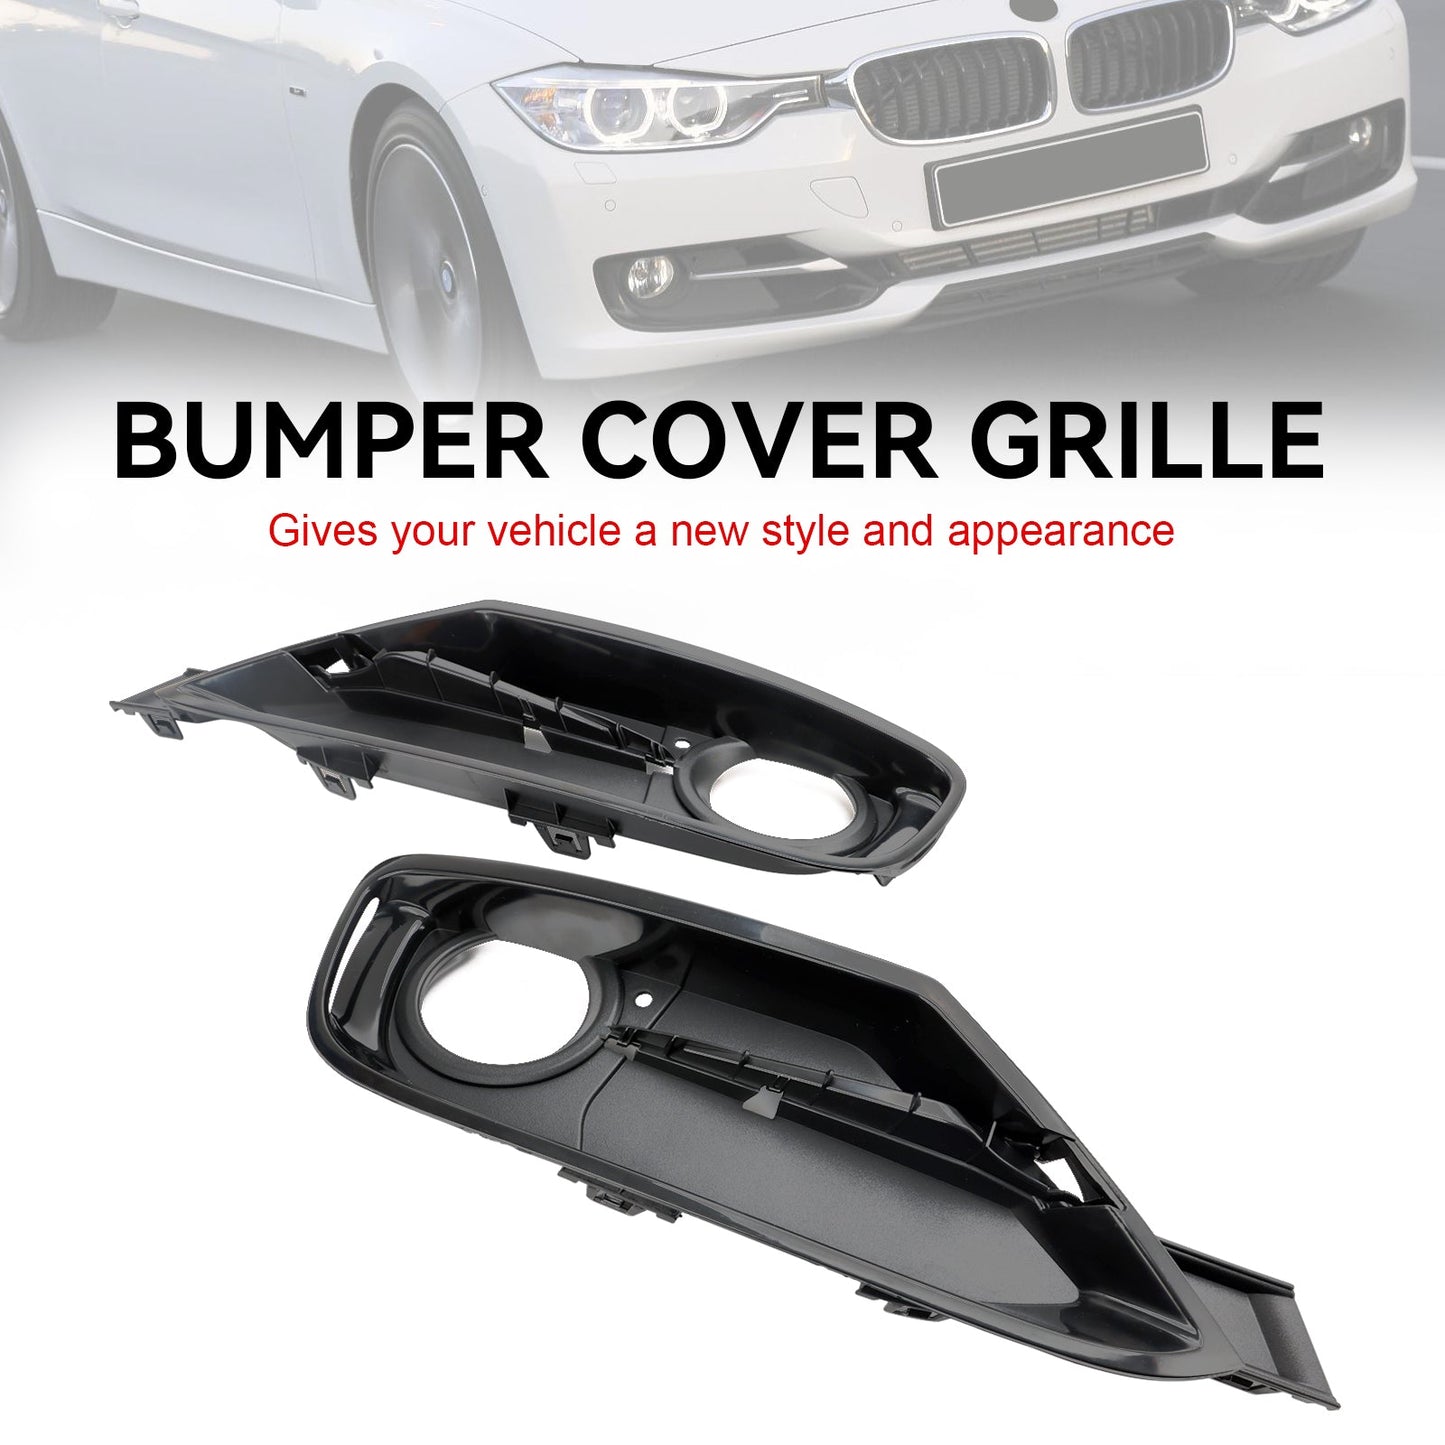 BMW 3 Series F30 F31 2013-2015 Front Bumper Fog Light Grille Covers 2PCS